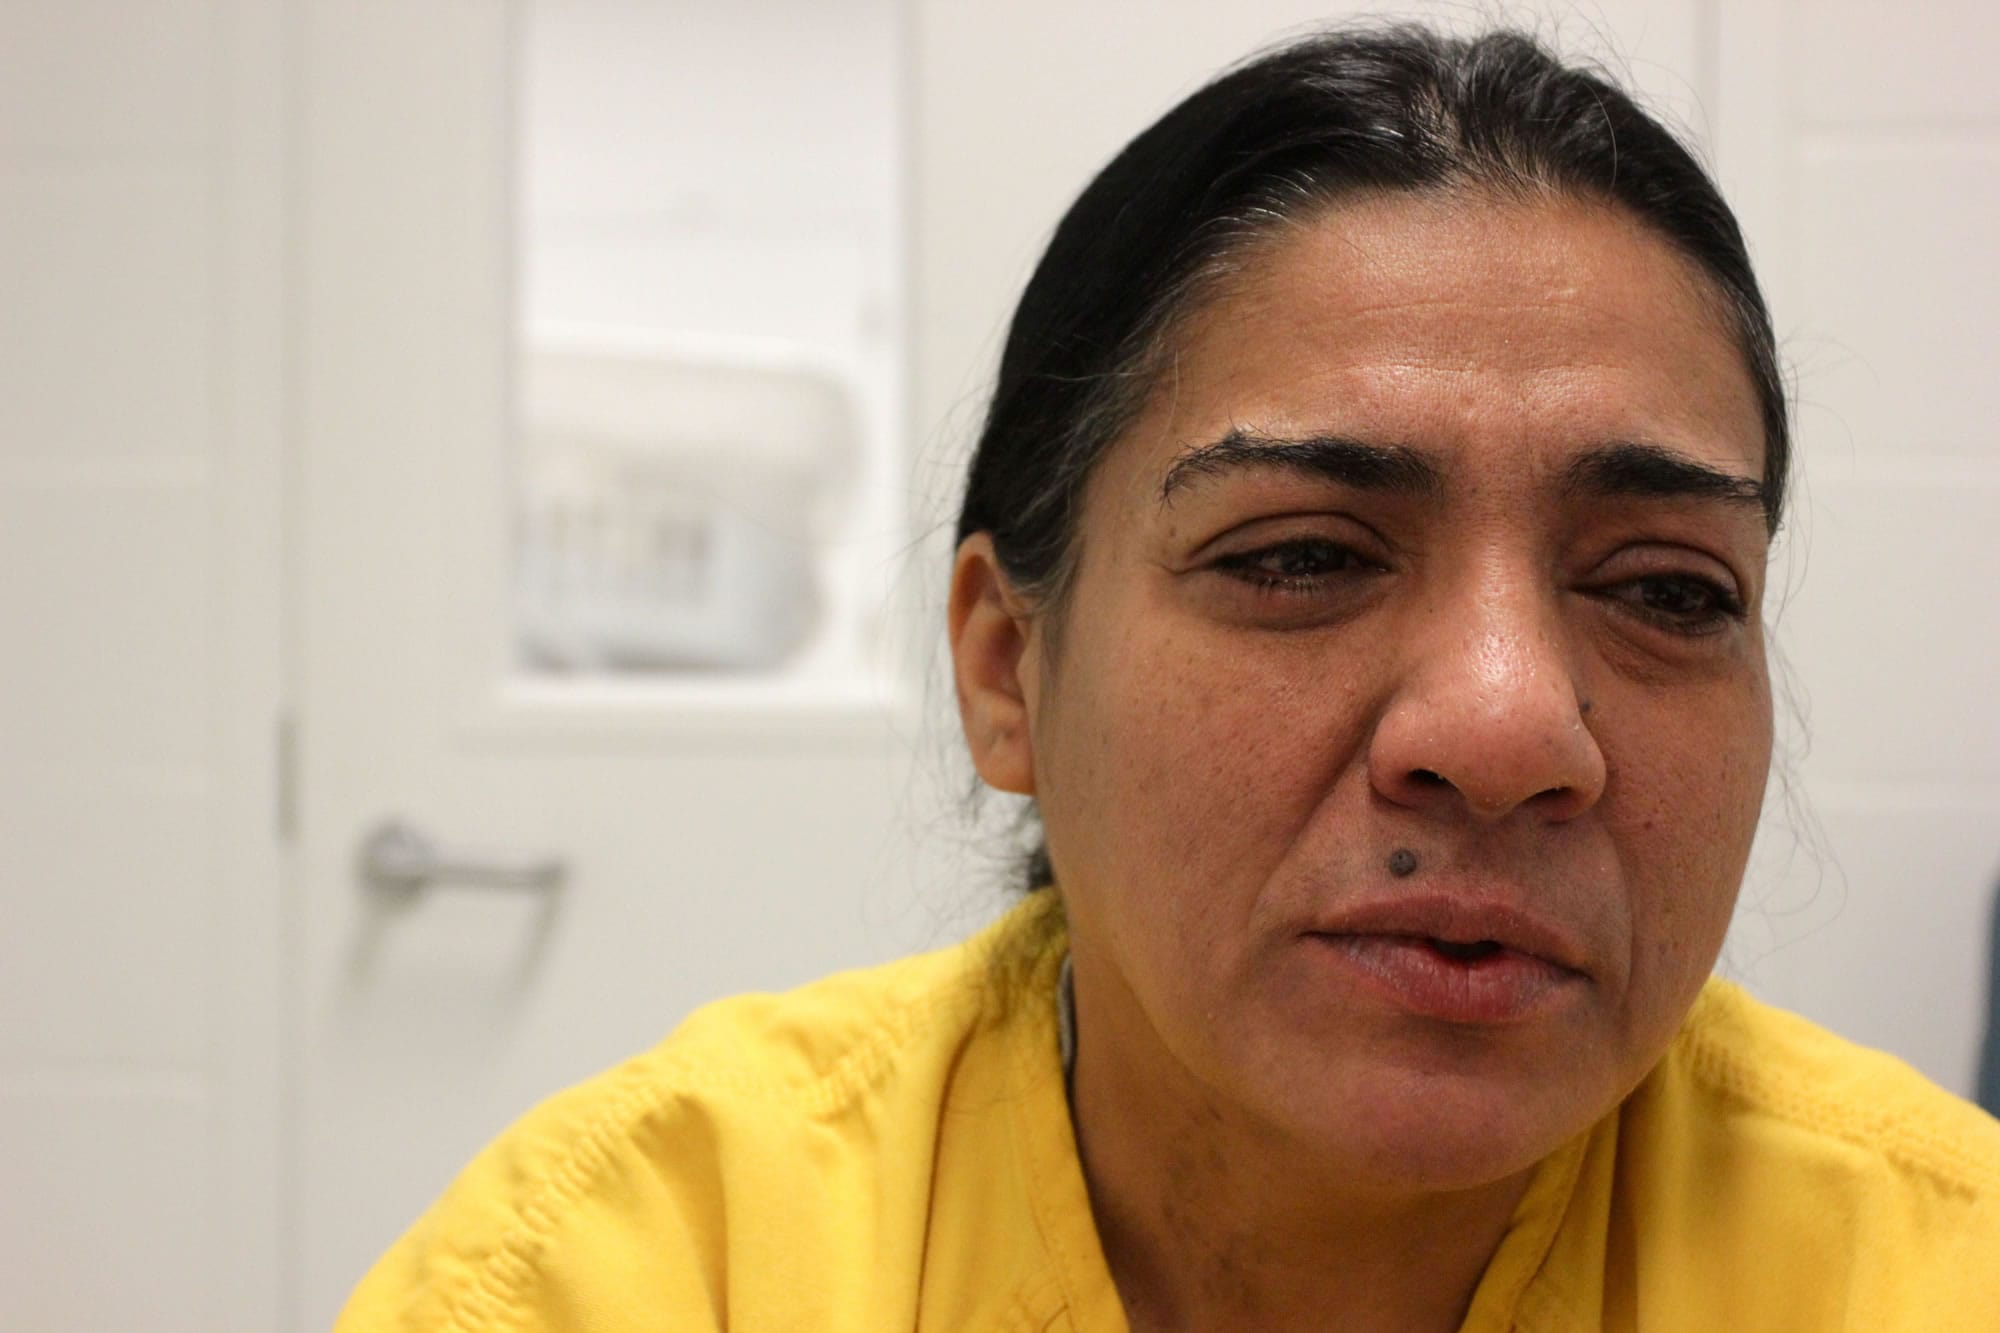 Clara Flores-Aguilar, a Honduras native, is seeking asylum in the United States after experiencing years of domestic violence.